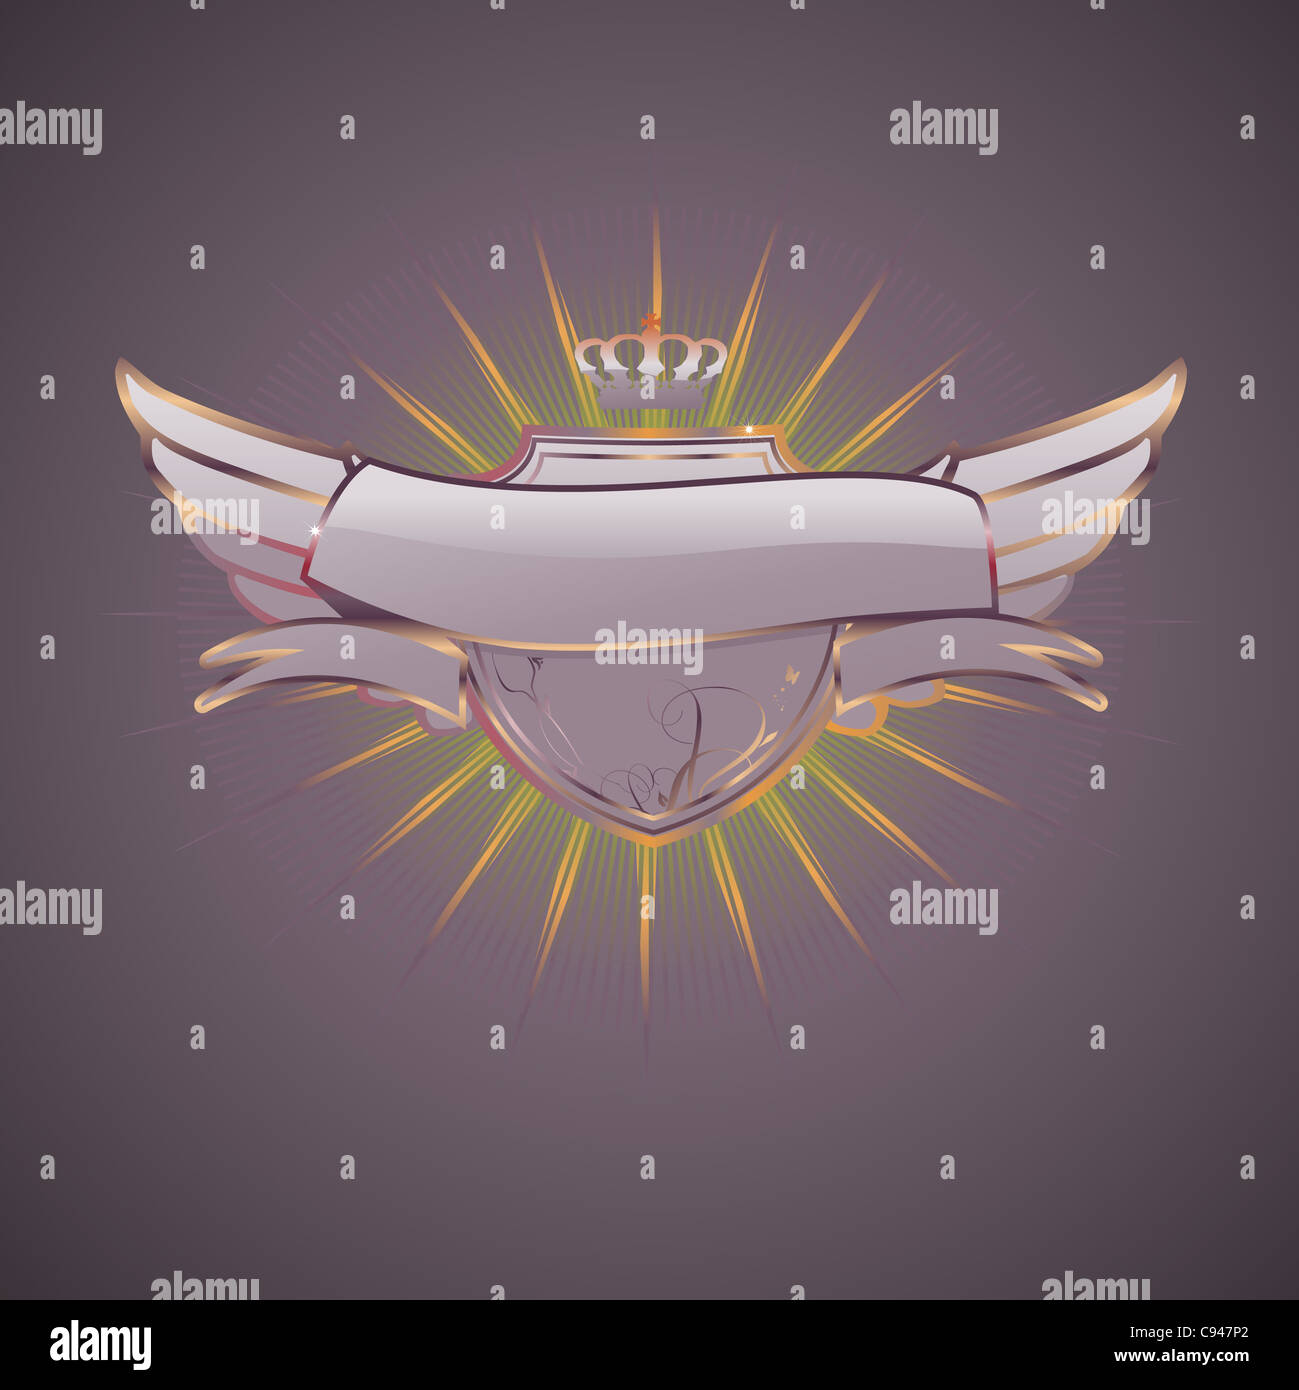 illustration of heraldic shield or badge with blank banner, so you can add your own text Stock Photo